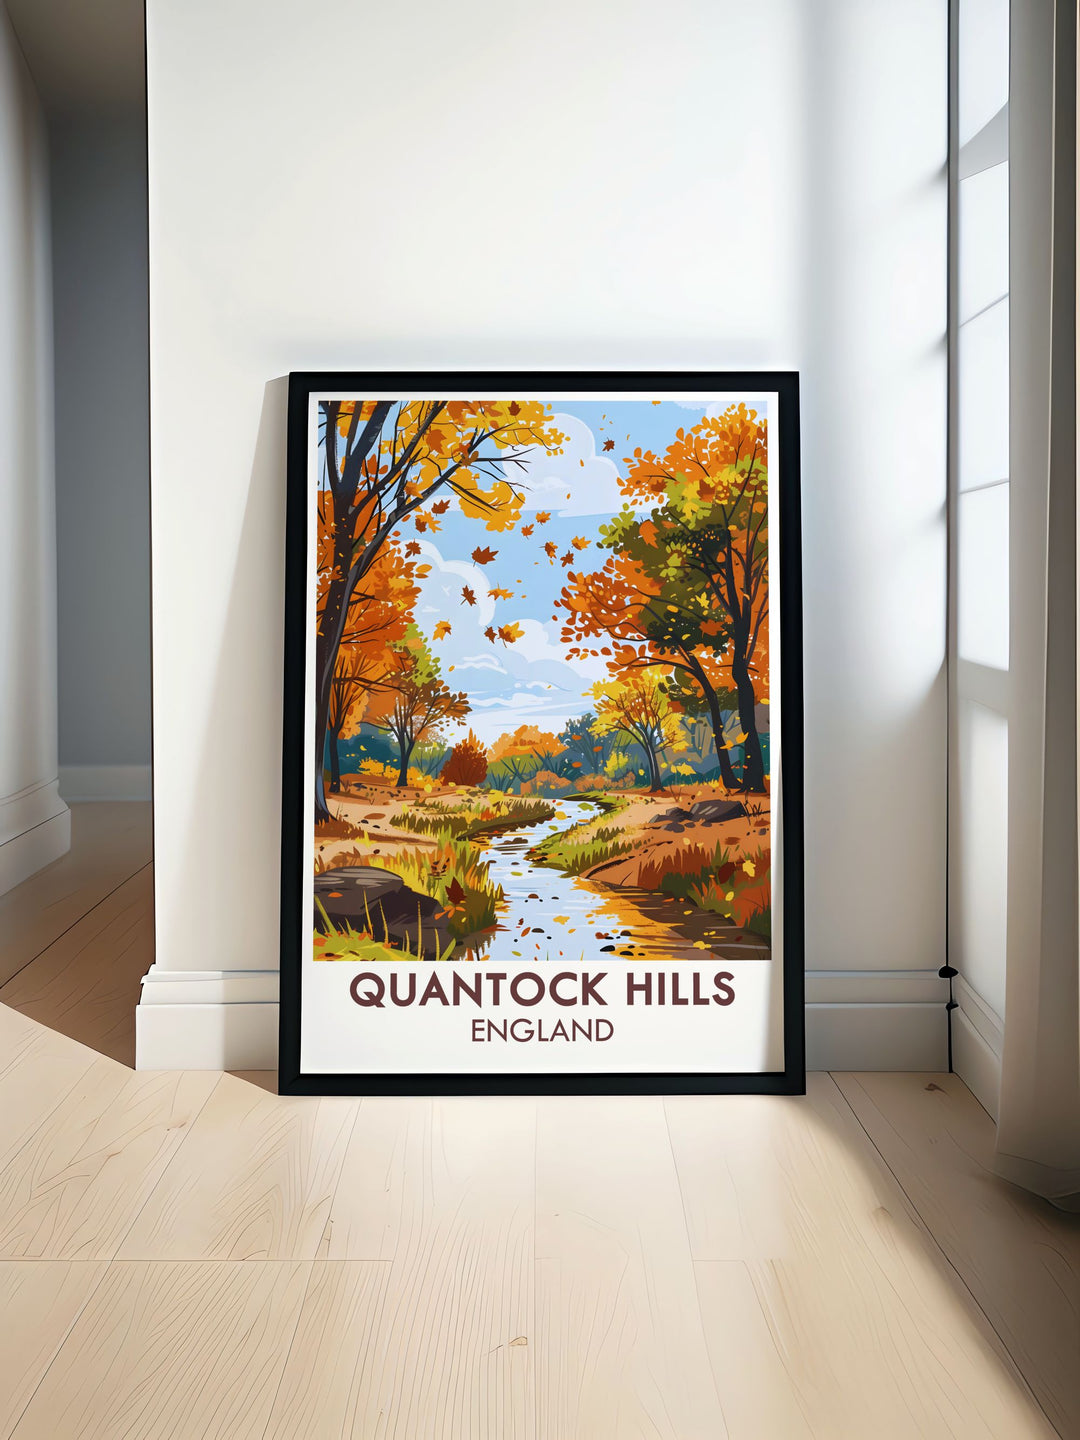 Holford Combe vintage travel print showcasing the serene beauty of Quantock Hills AONB and Somerset AONB perfect for home decor and travel enthusiasts who appreciate Somerset Travel Art and the picturesque views of Vale Taunton Deane and Quantock Heath.